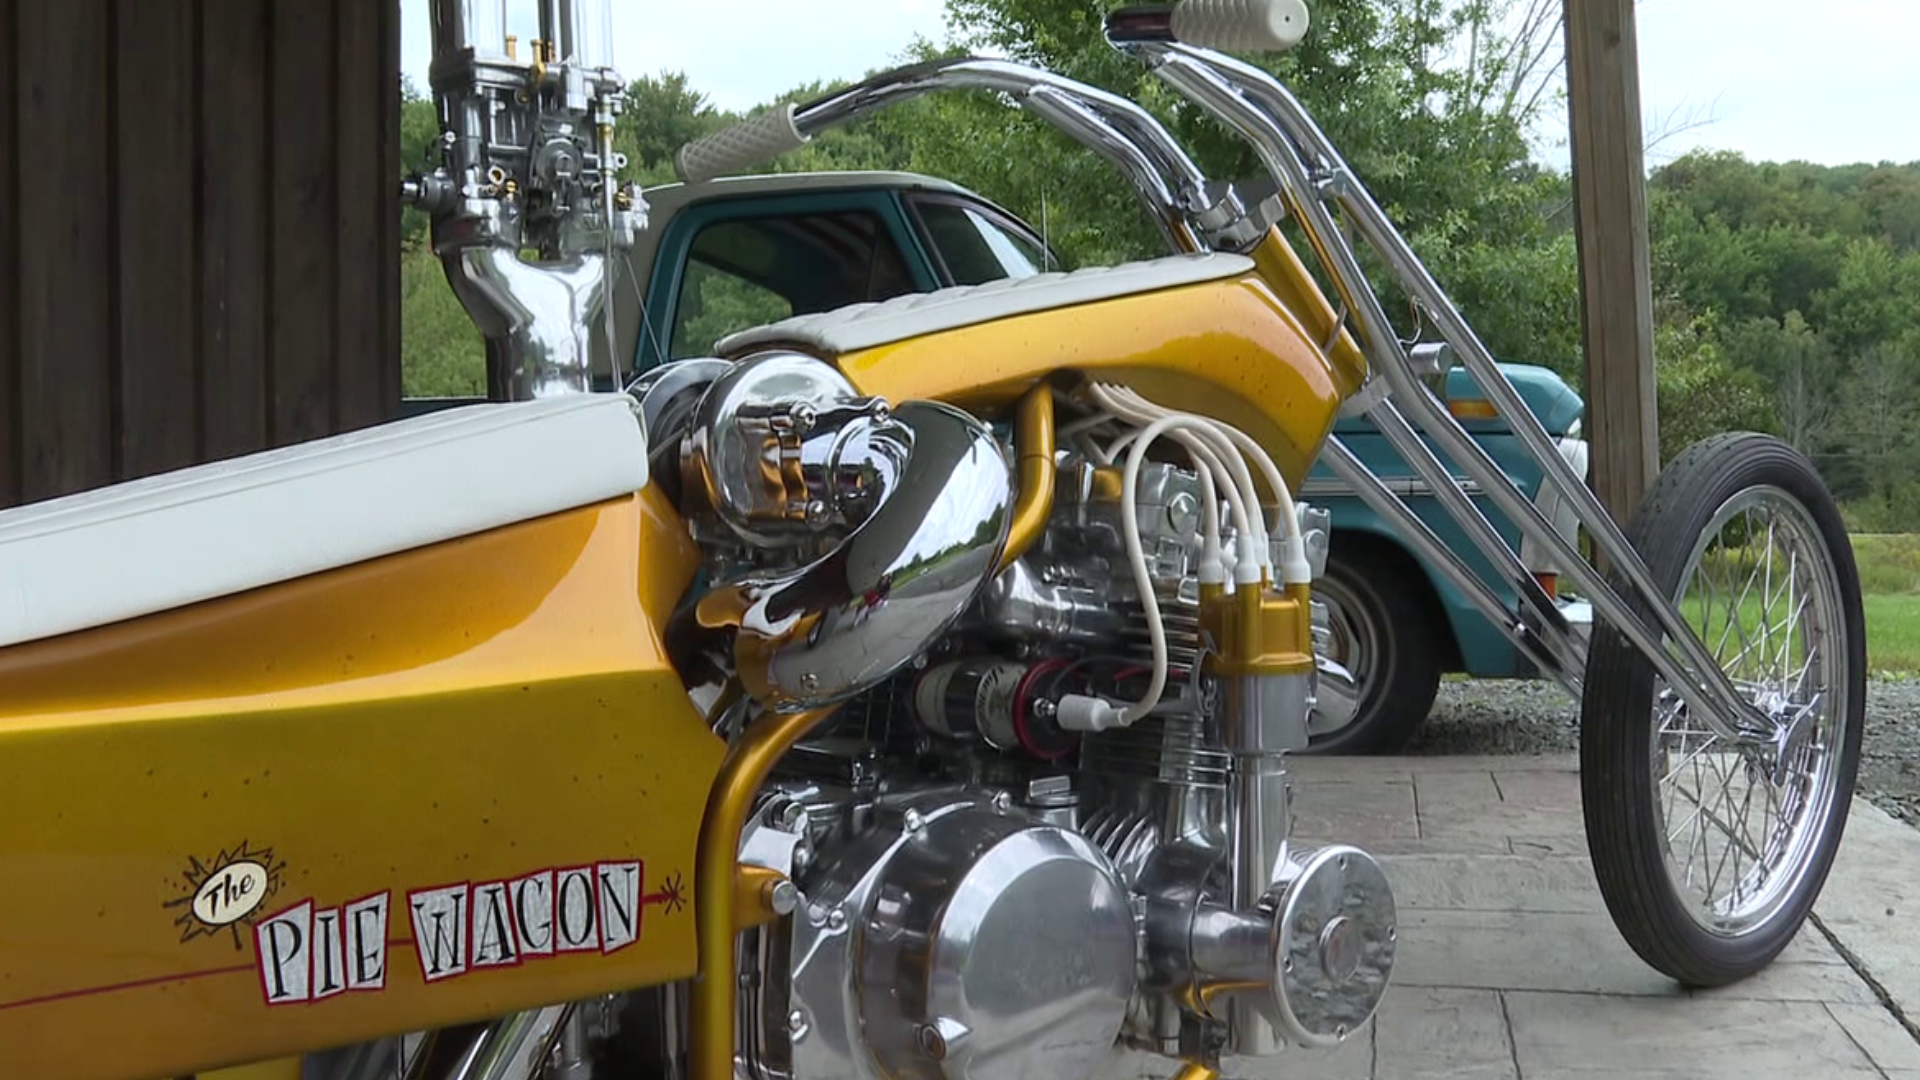 A man from Susquehanna County built a custom motorcycle for a competition in California, and its uniqueness delivered a reward.